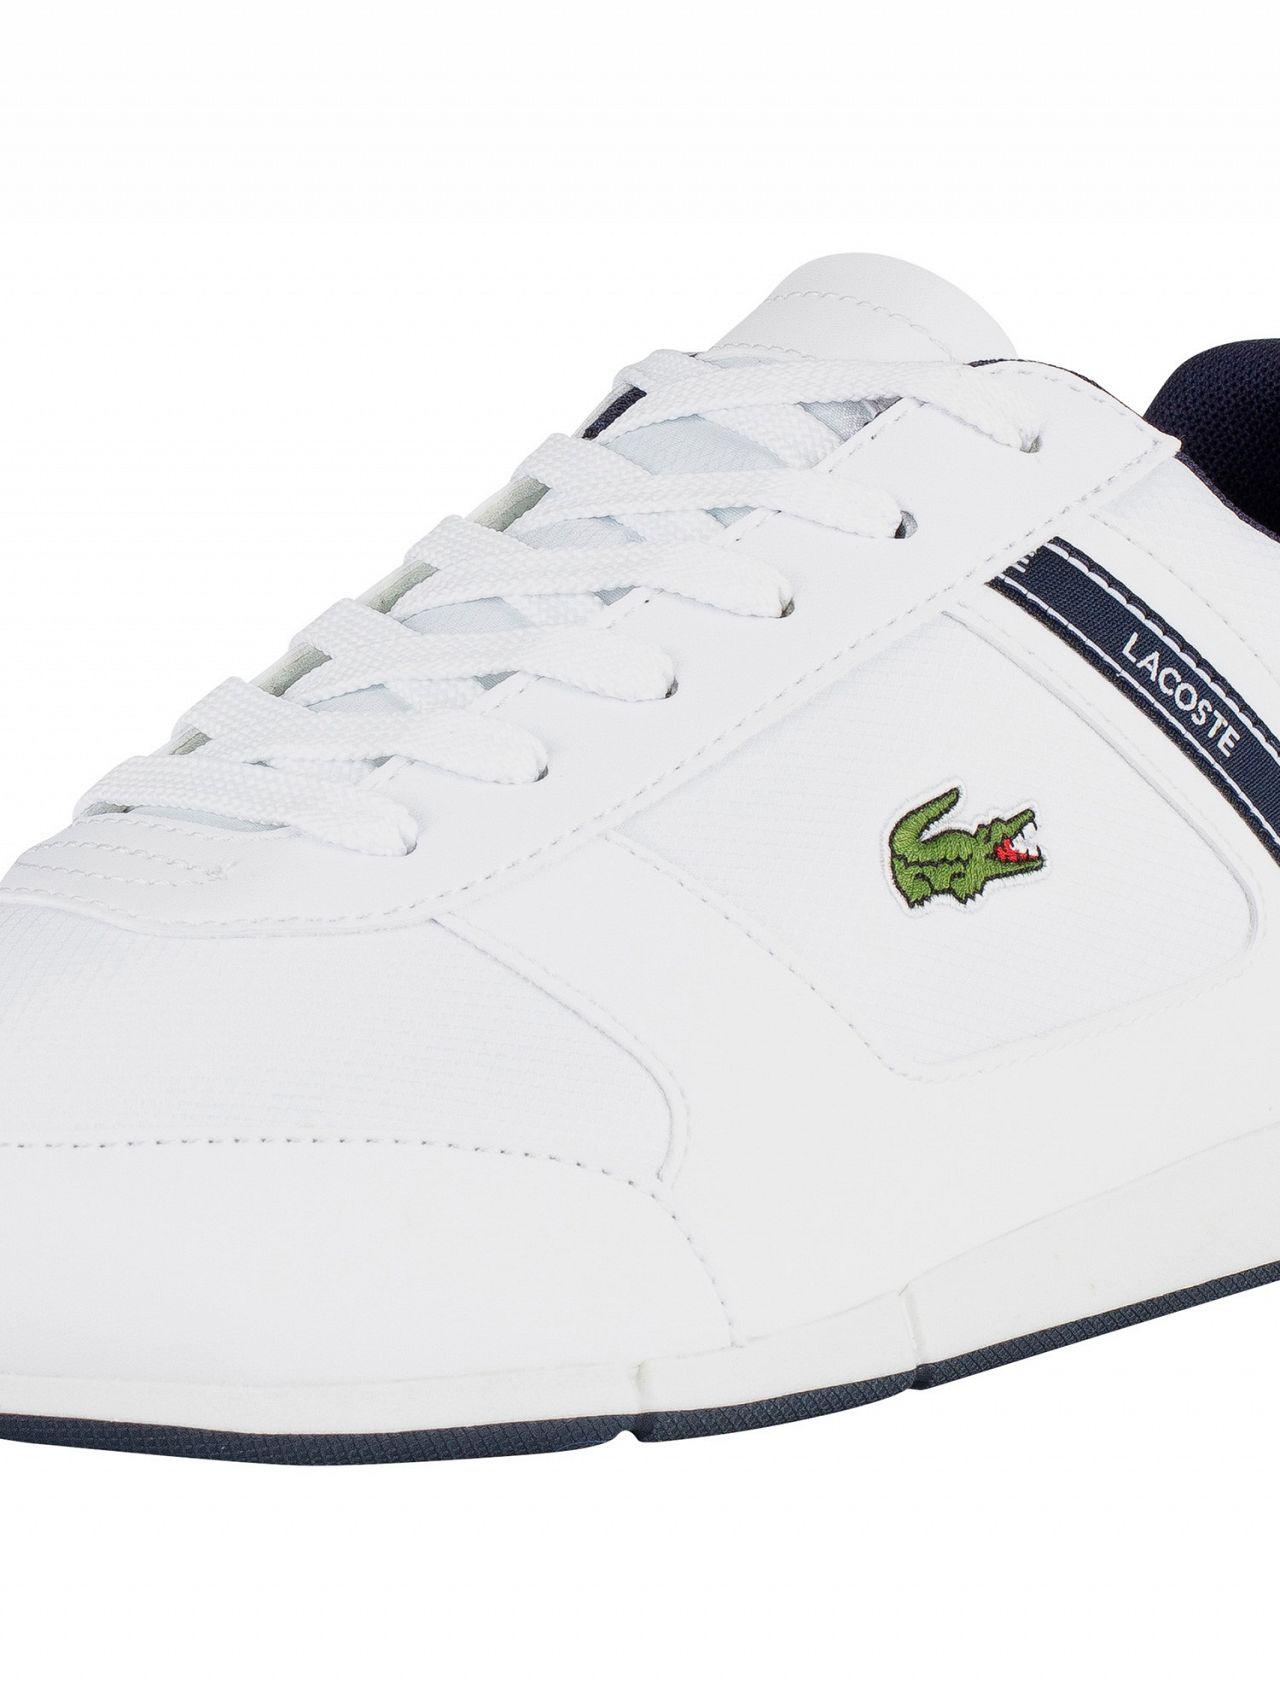 Lacoste Leather Minerva Sport 119 2 Cma Trainers White for Men - Lyst